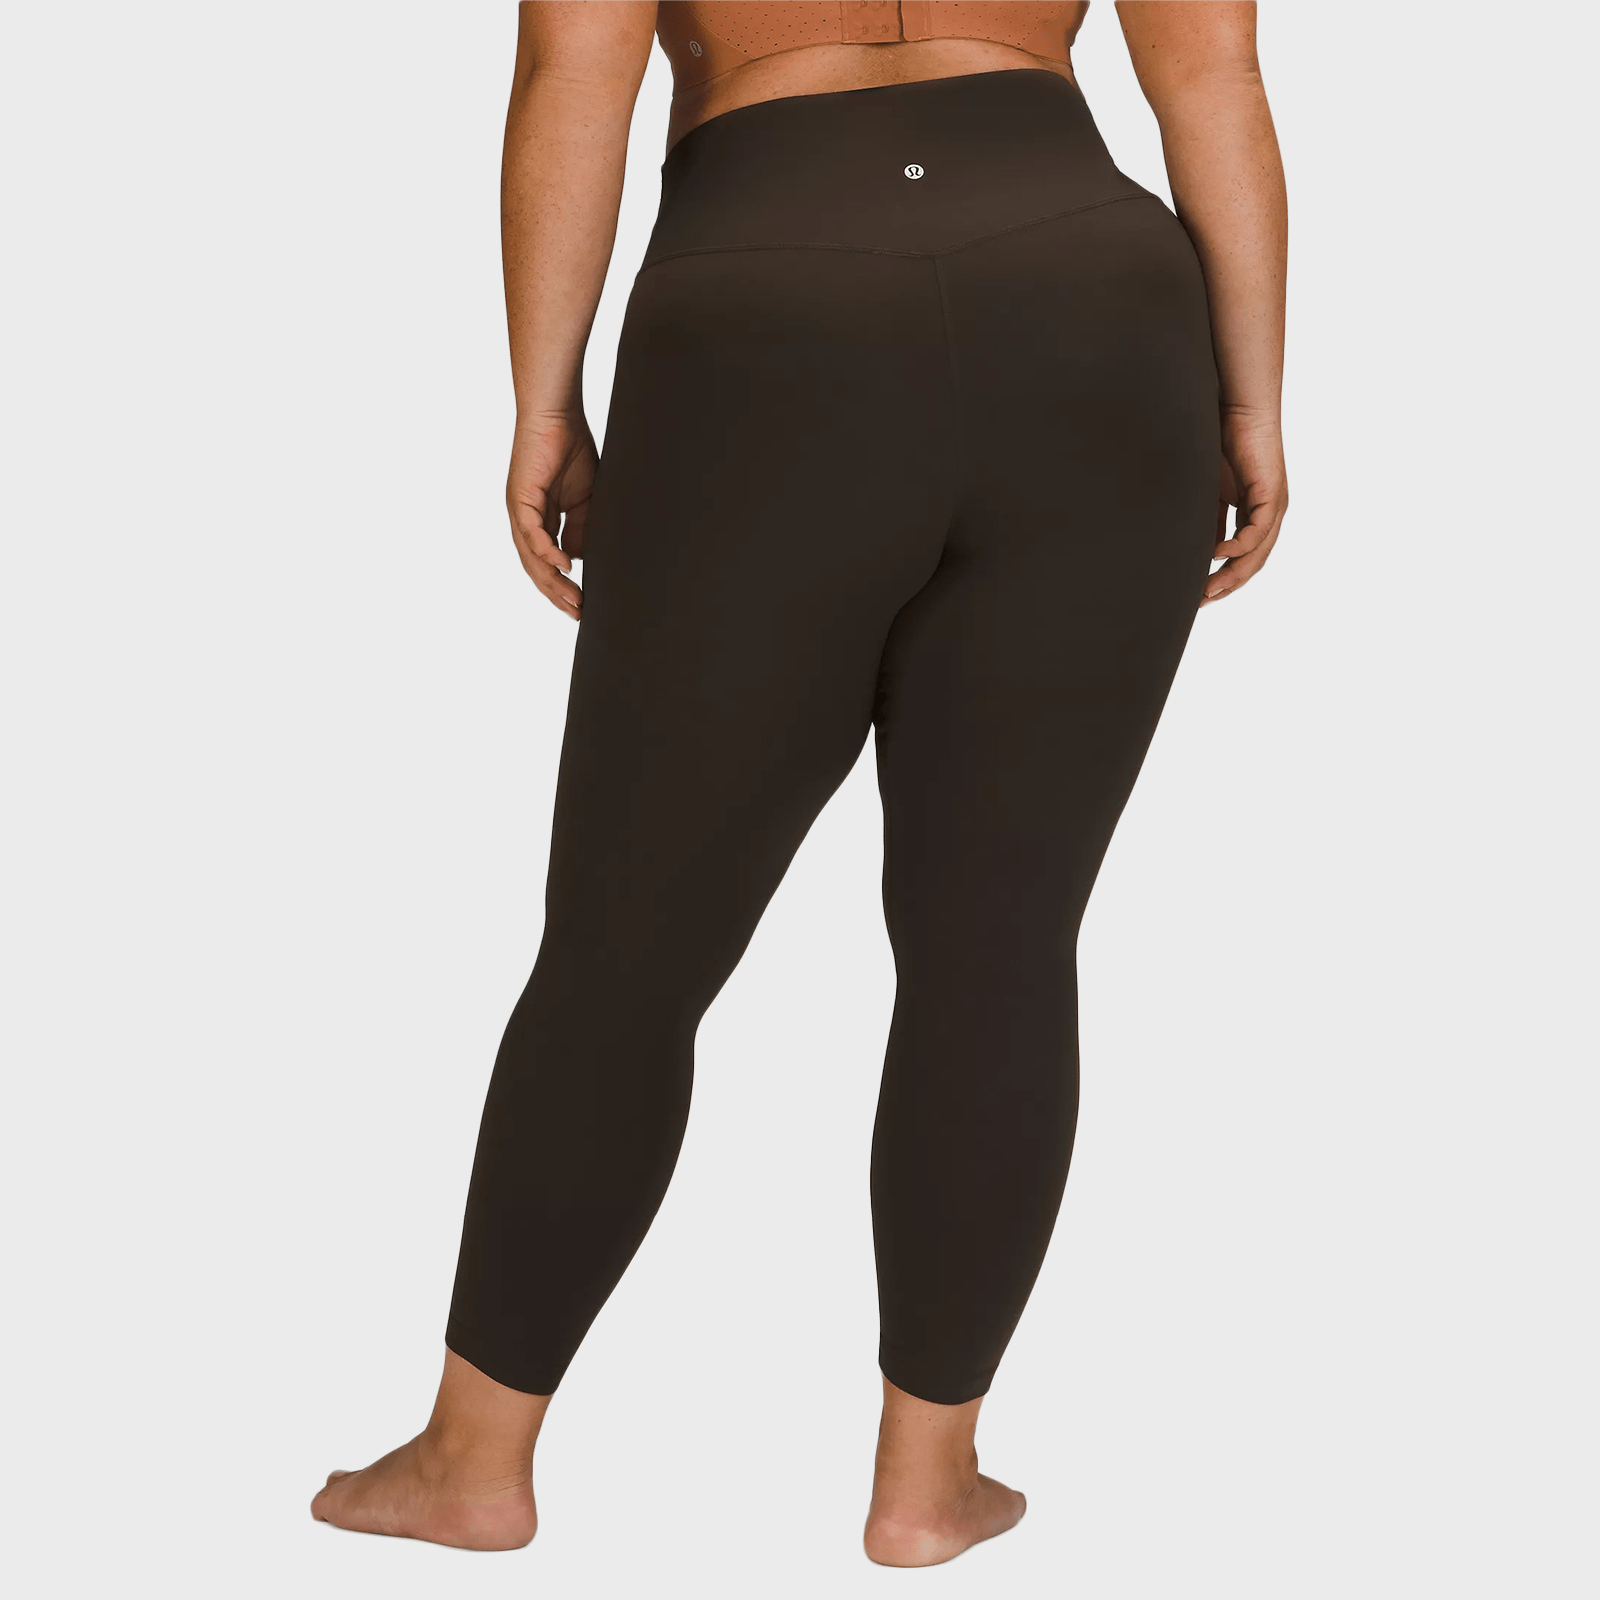 Lululemon size 6 black leggings-pilling noted on butt and groin area price  as is - $9 - From Kay